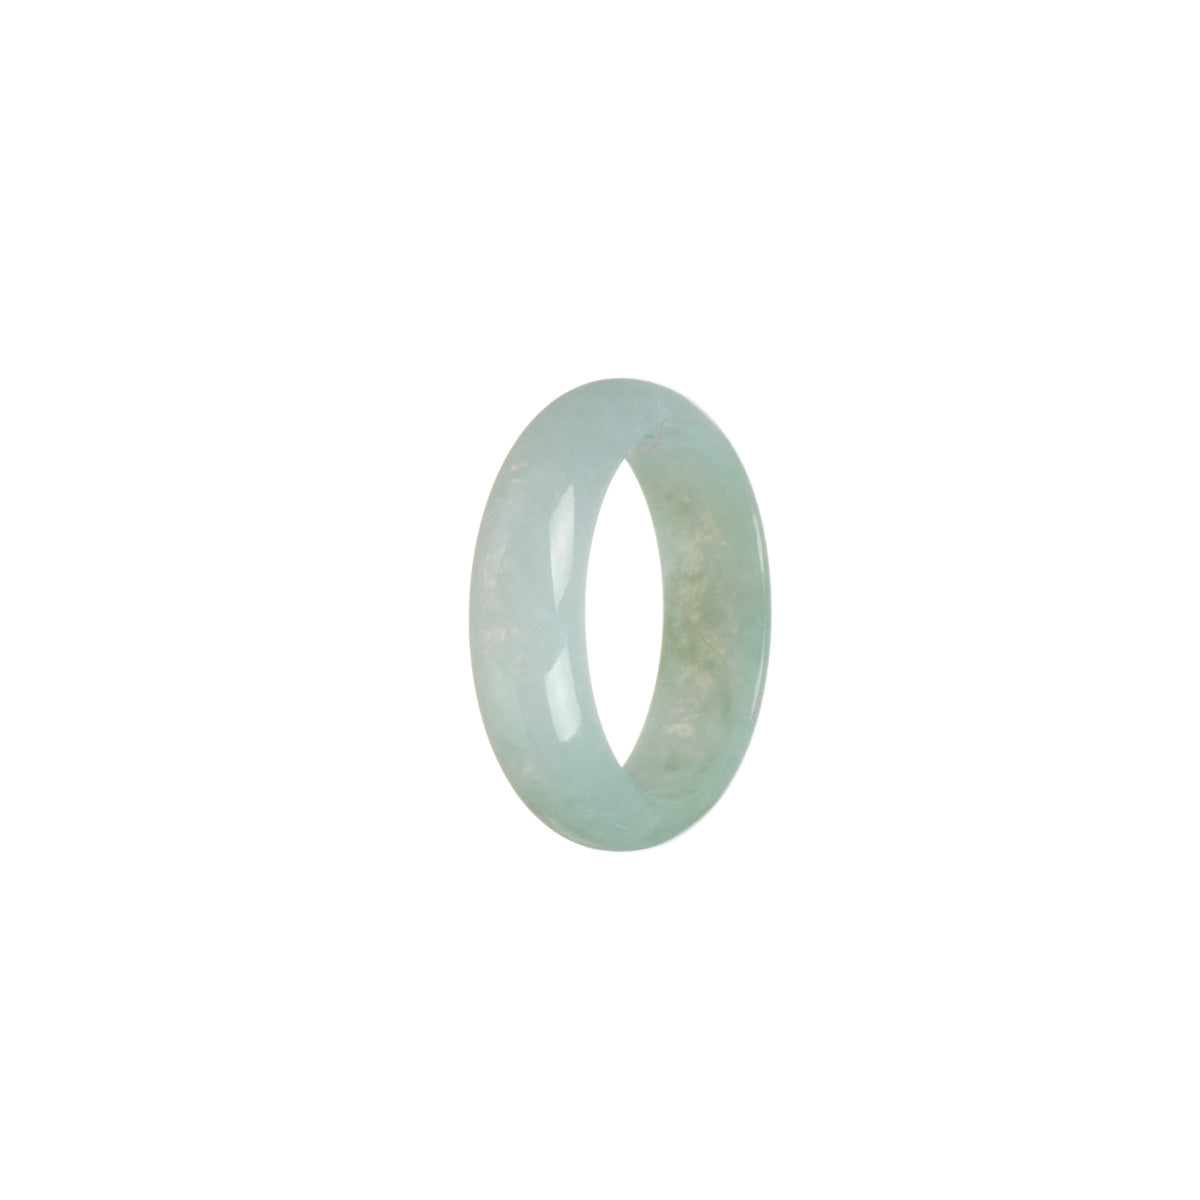 Authentic White with Pale green Jadeite Jade Ring- Size T 1/2